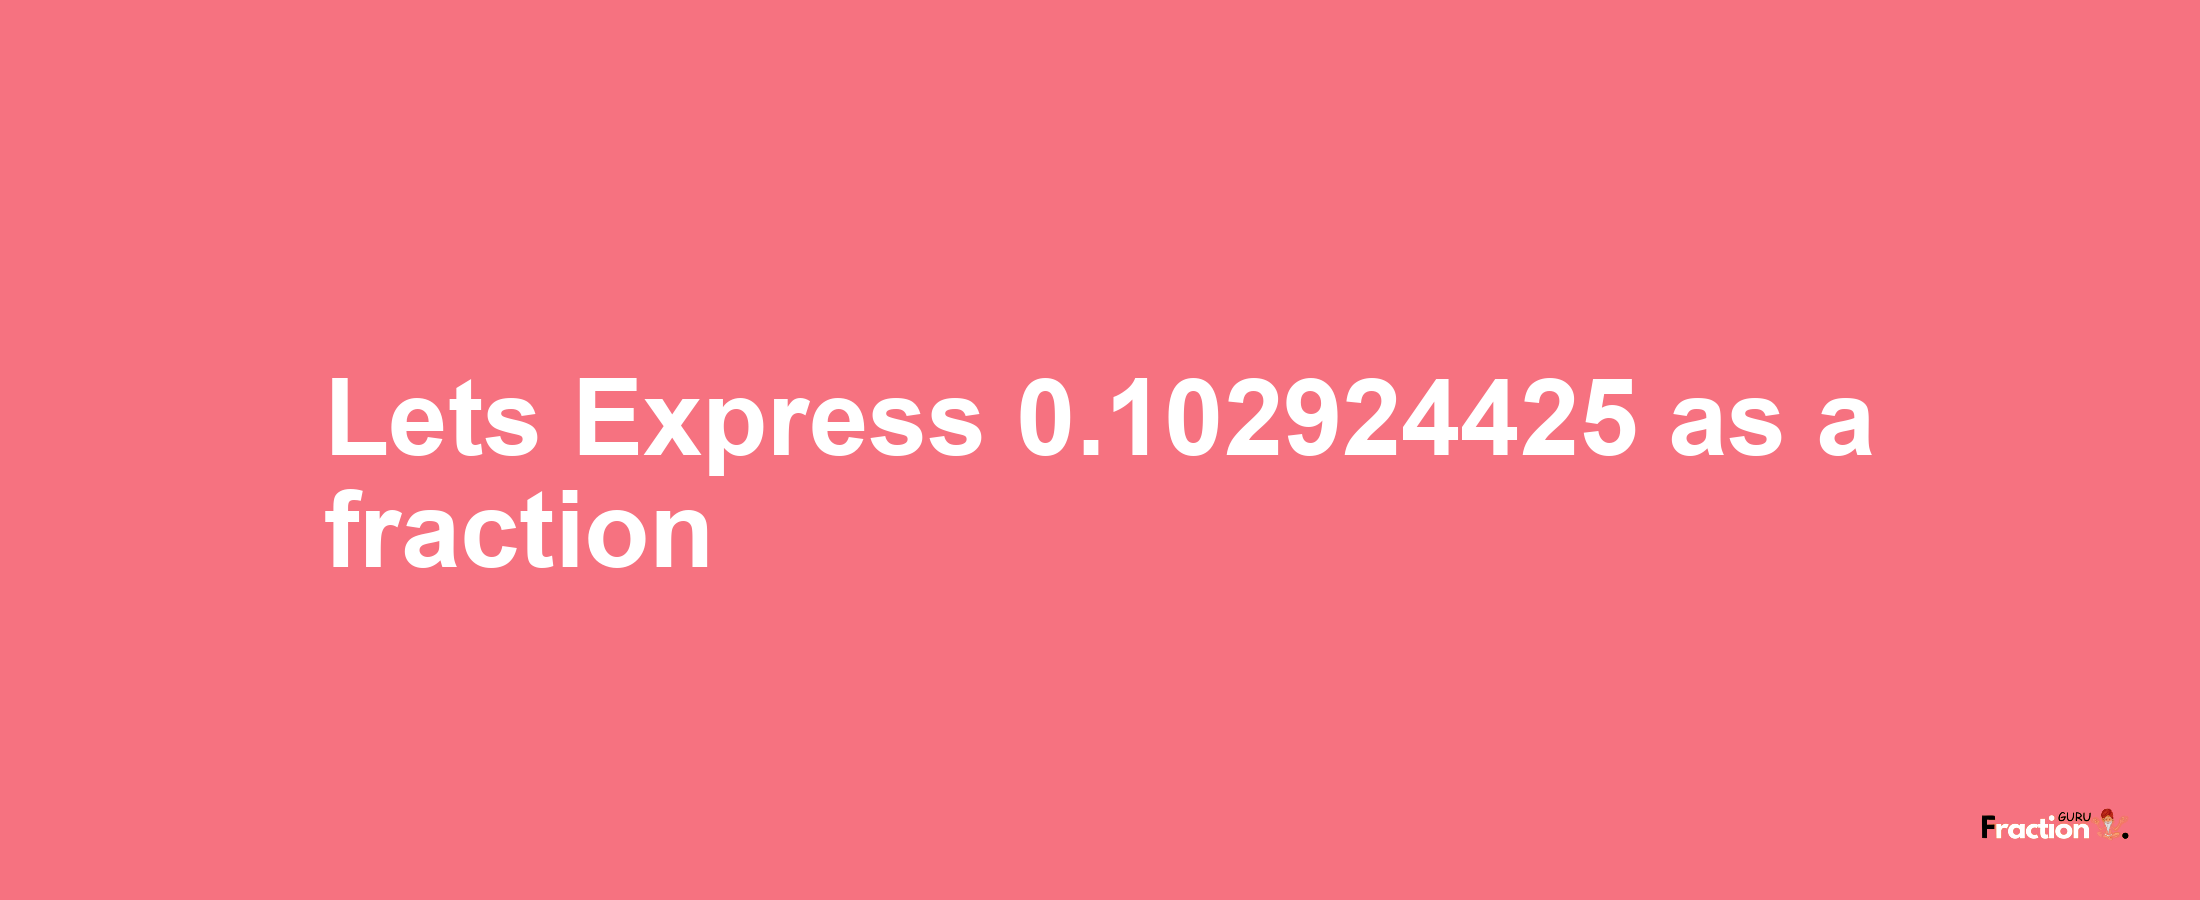 Lets Express 0.102924425 as afraction